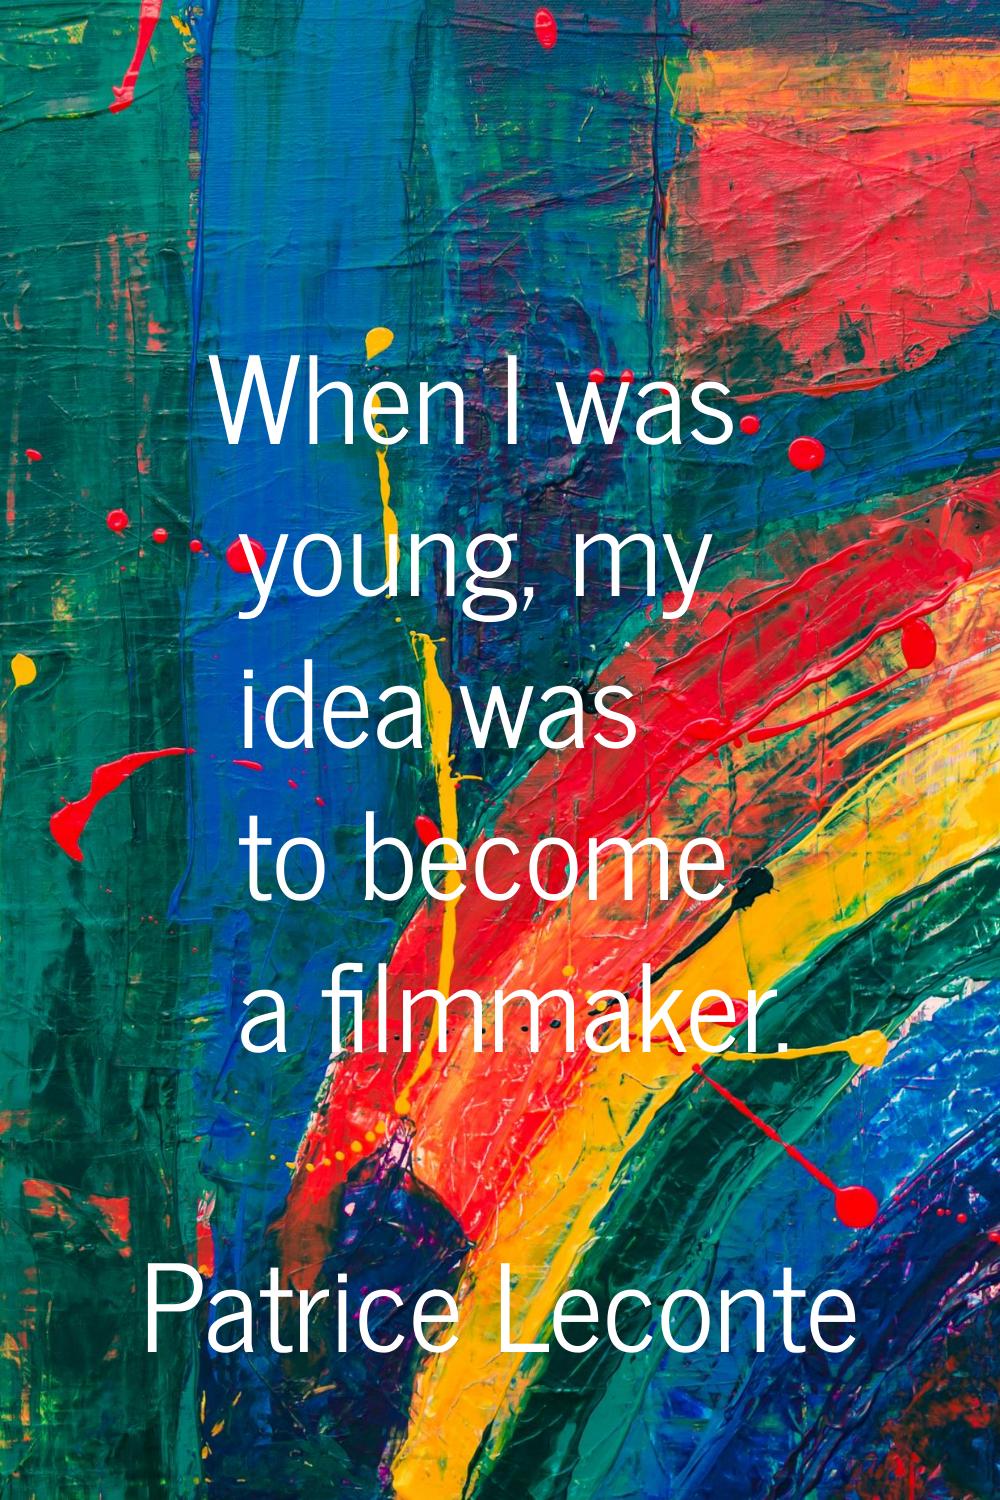 When I was young, my idea was to become a filmmaker.